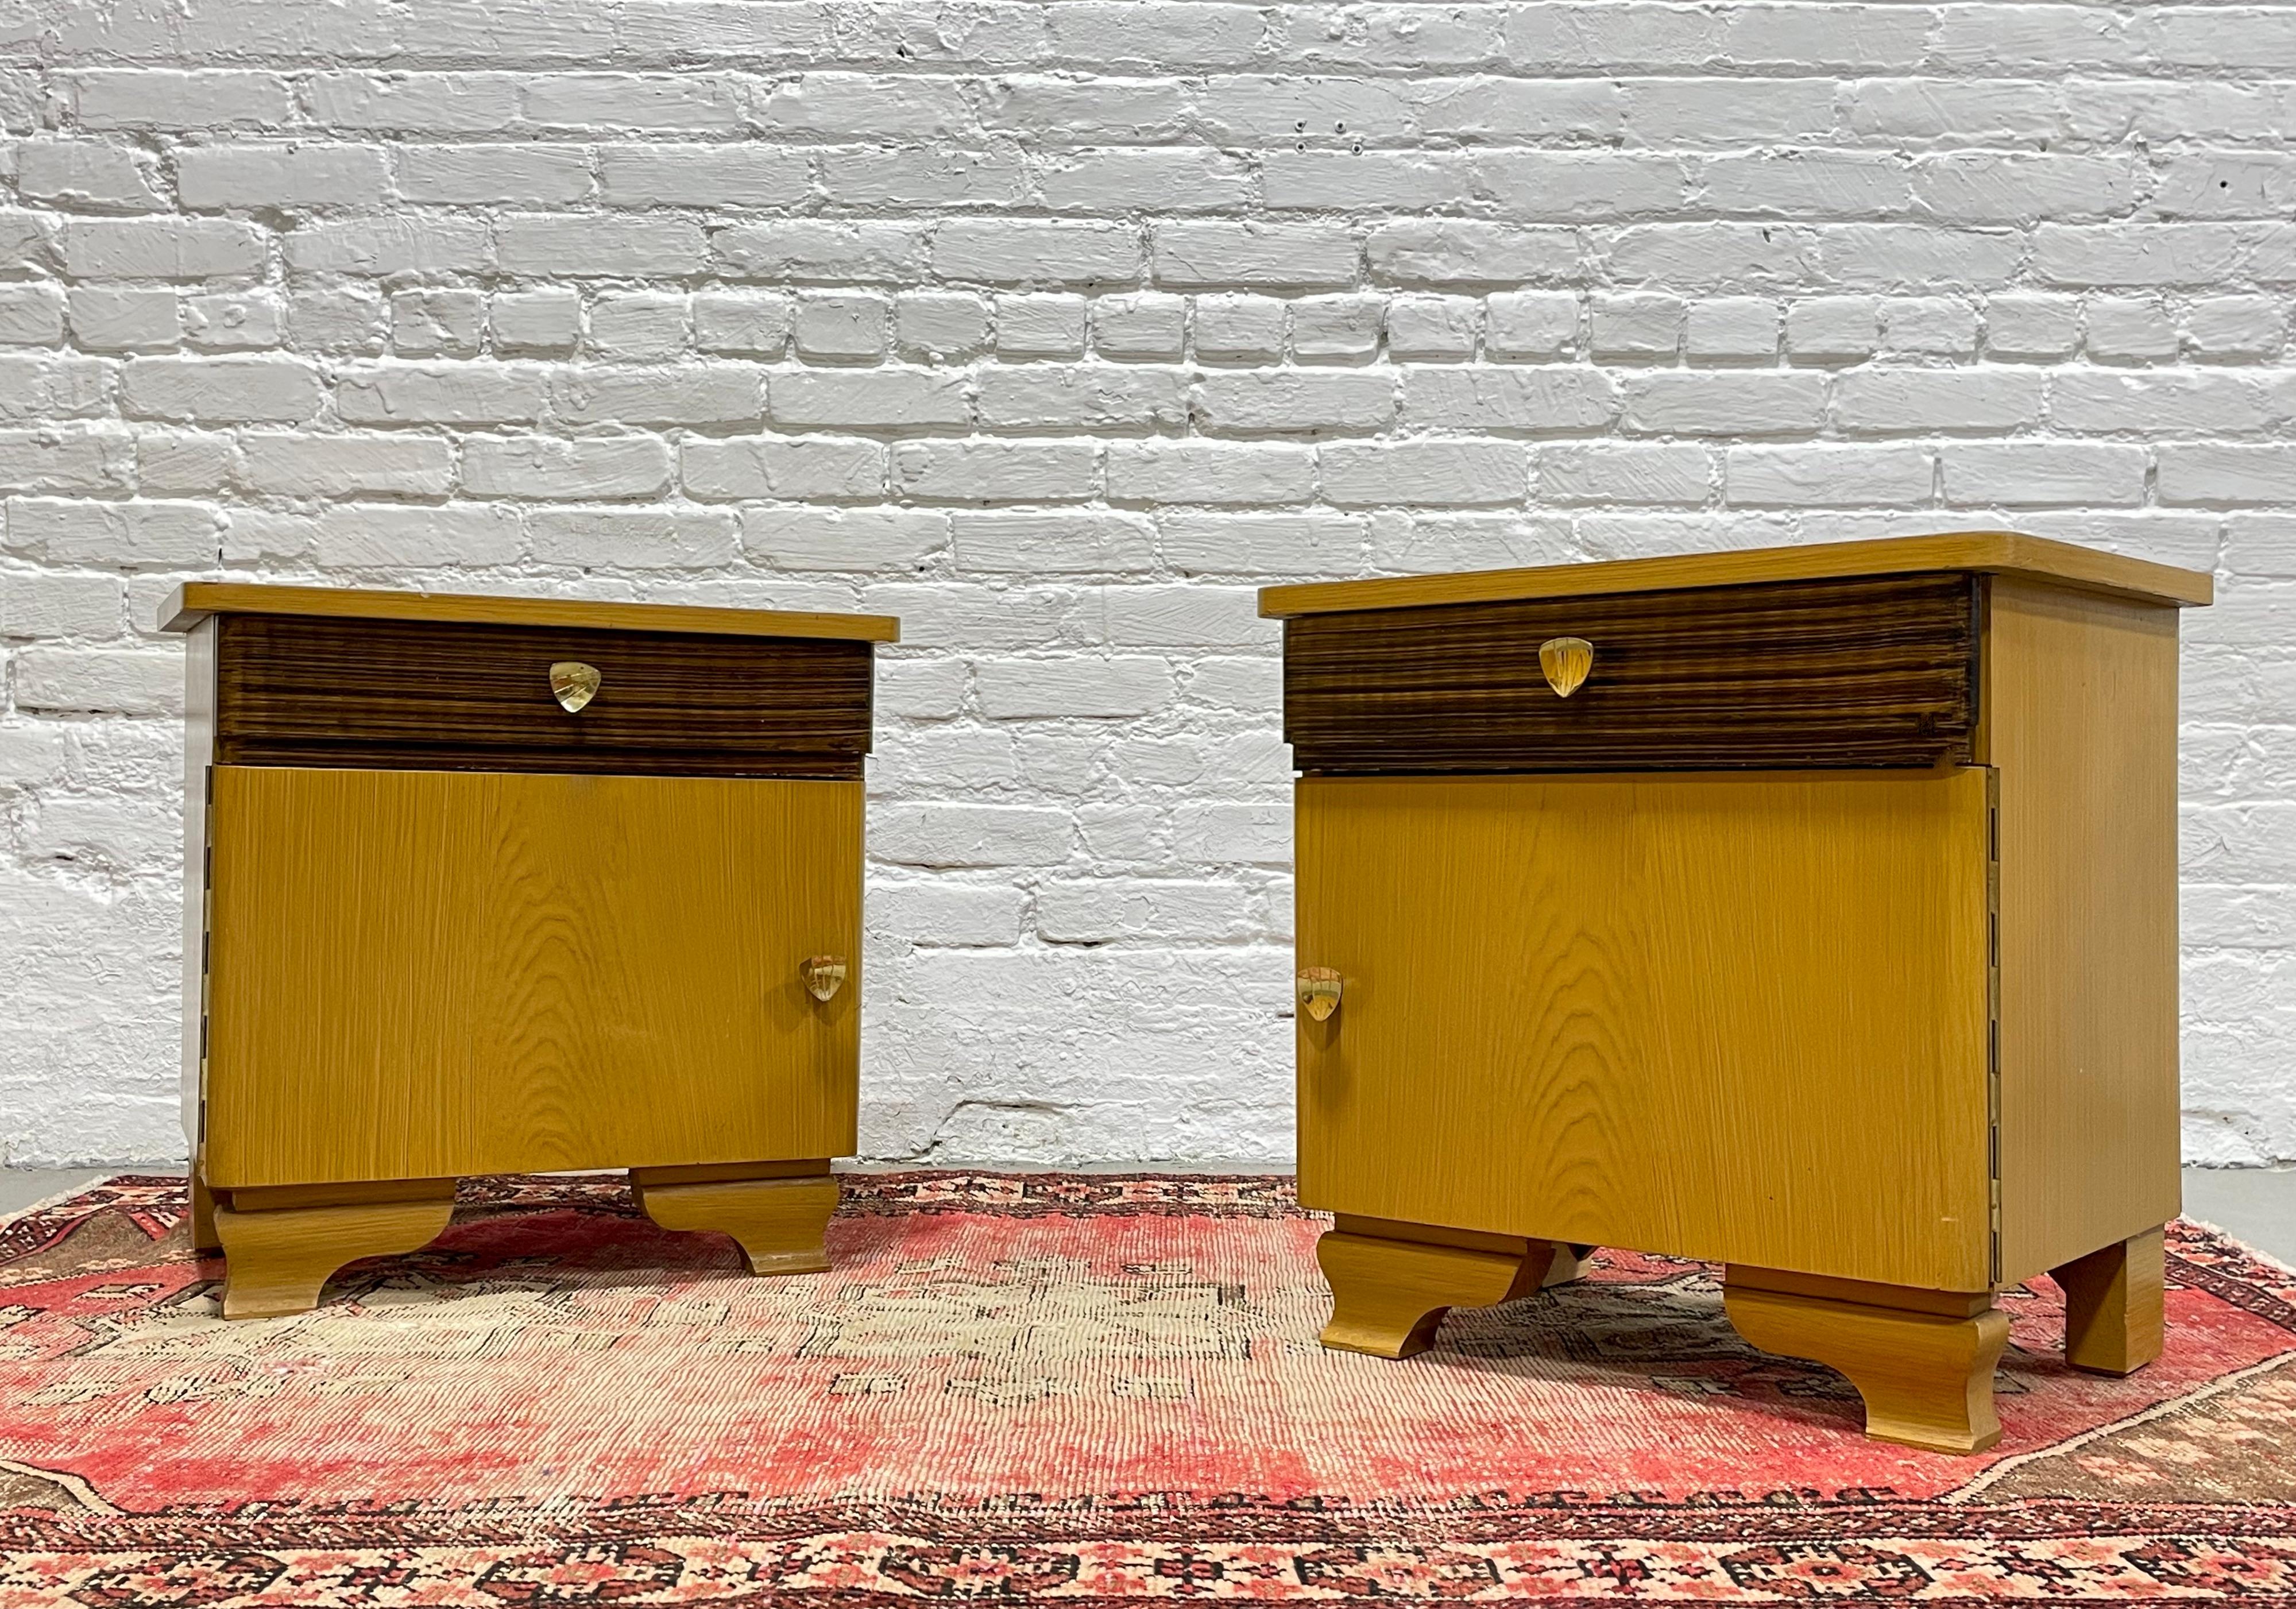 Pair of Dutch Modern Nightstands, c. 1950's. This lovely pair has an art deco flair with gorgeous legs and gold colored pulls. Gorgeous two tone design - easy to match with other wood tones. Each nightstand has a drawer and open space behind the